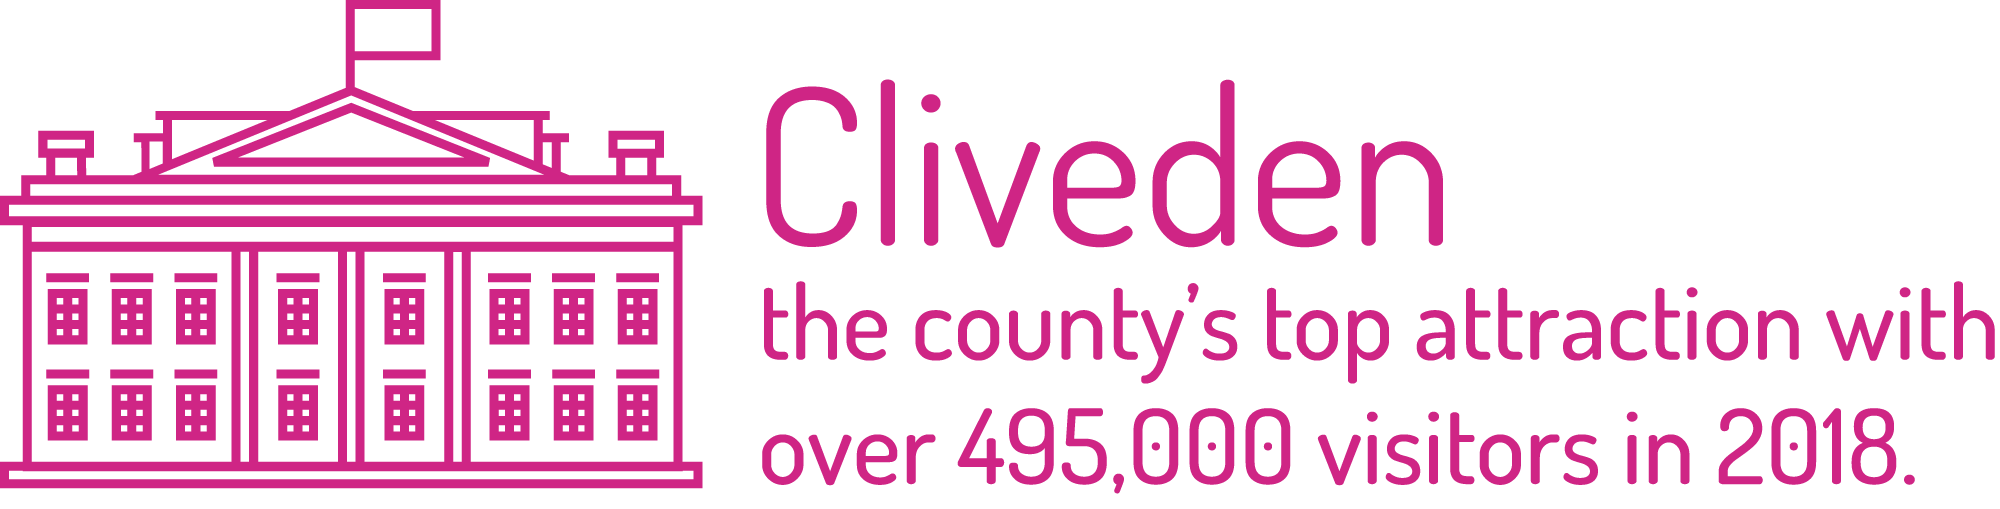 Cliveden the country's top attraction with over 495,000 visitors in 2018